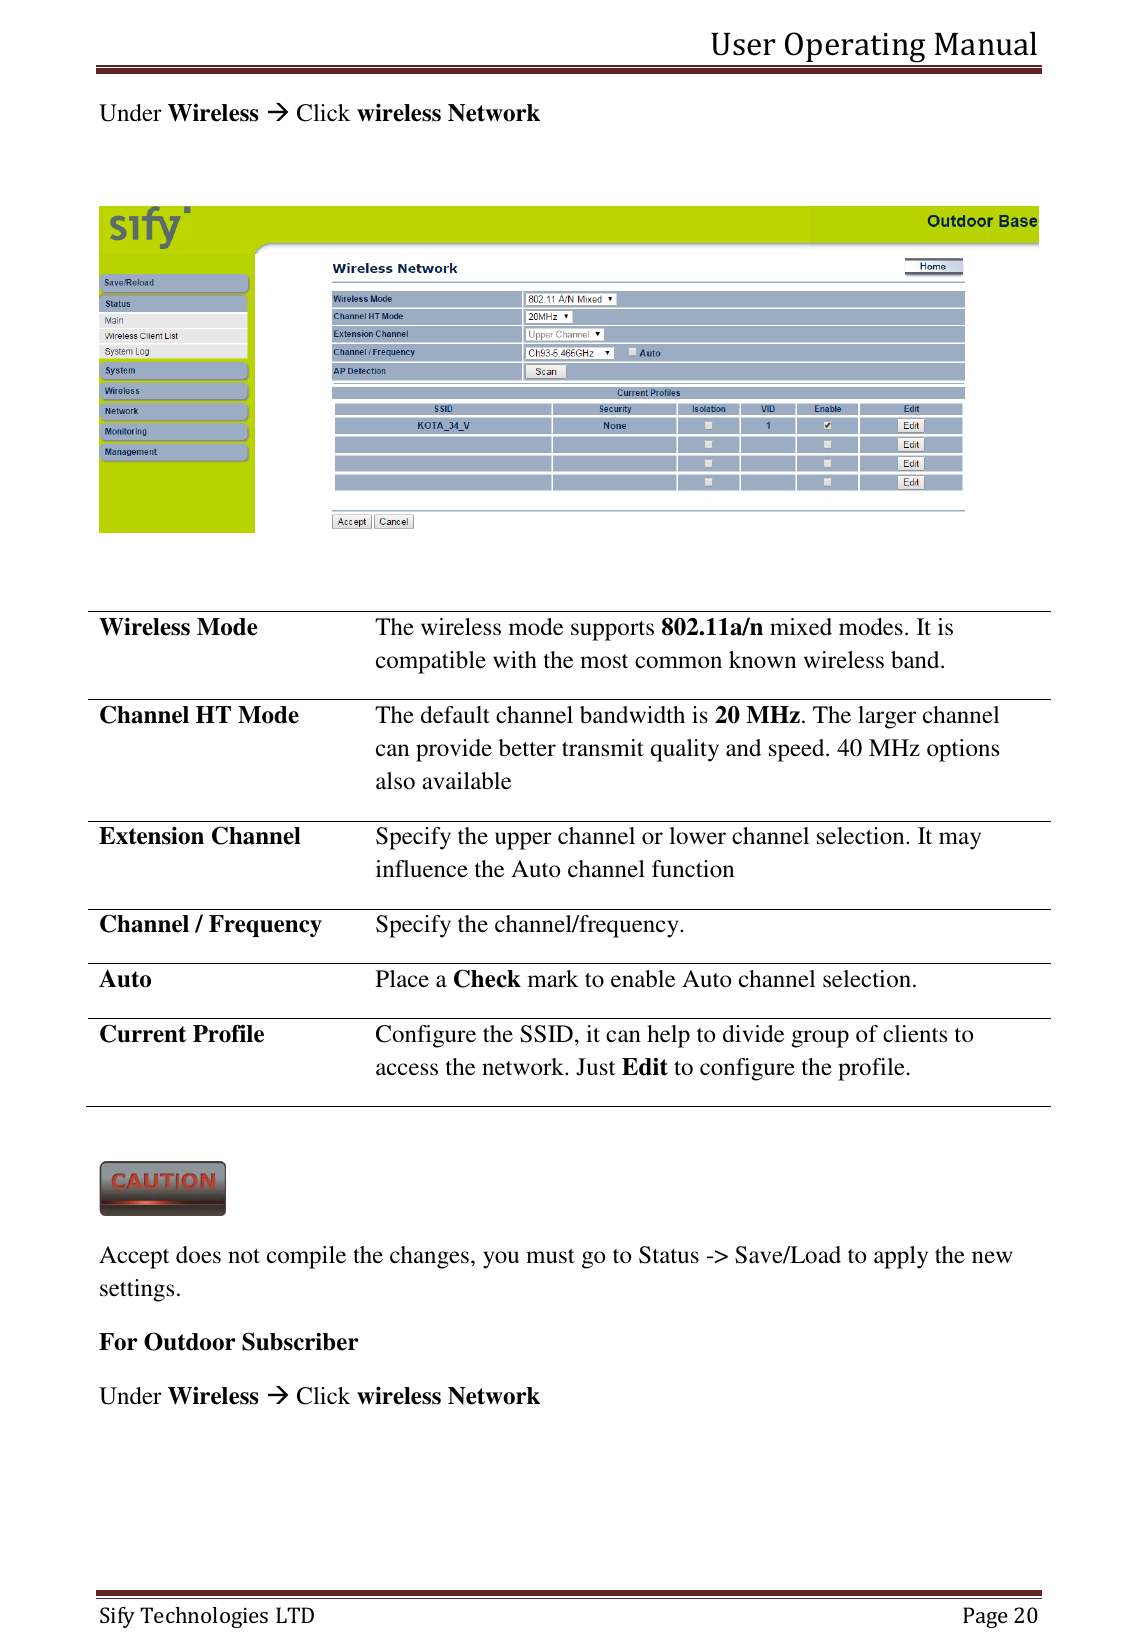 User Operating Manual   Sify Technologies LTD   Page 20 Under Wireless  Click wireless Network    Wireless Mode The wireless mode supports 802.11a/n mixed modes. It is compatible with the most common known wireless band. Channel HT Mode The default channel bandwidth is 20 MHz. The larger channel can provide better transmit quality and speed. 40 MHz options also available Extension Channel Specify the upper channel or lower channel selection. It may influence the Auto channel function Channel / Frequency Specify the channel/frequency. Auto Place a Check mark to enable Auto channel selection. Current Profile  Configure the SSID, it can help to divide group of clients to access the network. Just Edit to configure the profile.   Accept does not compile the changes, you must go to Status -&gt; Save/Load to apply the new settings.  For Outdoor Subscriber Under Wireless  Click wireless Network 